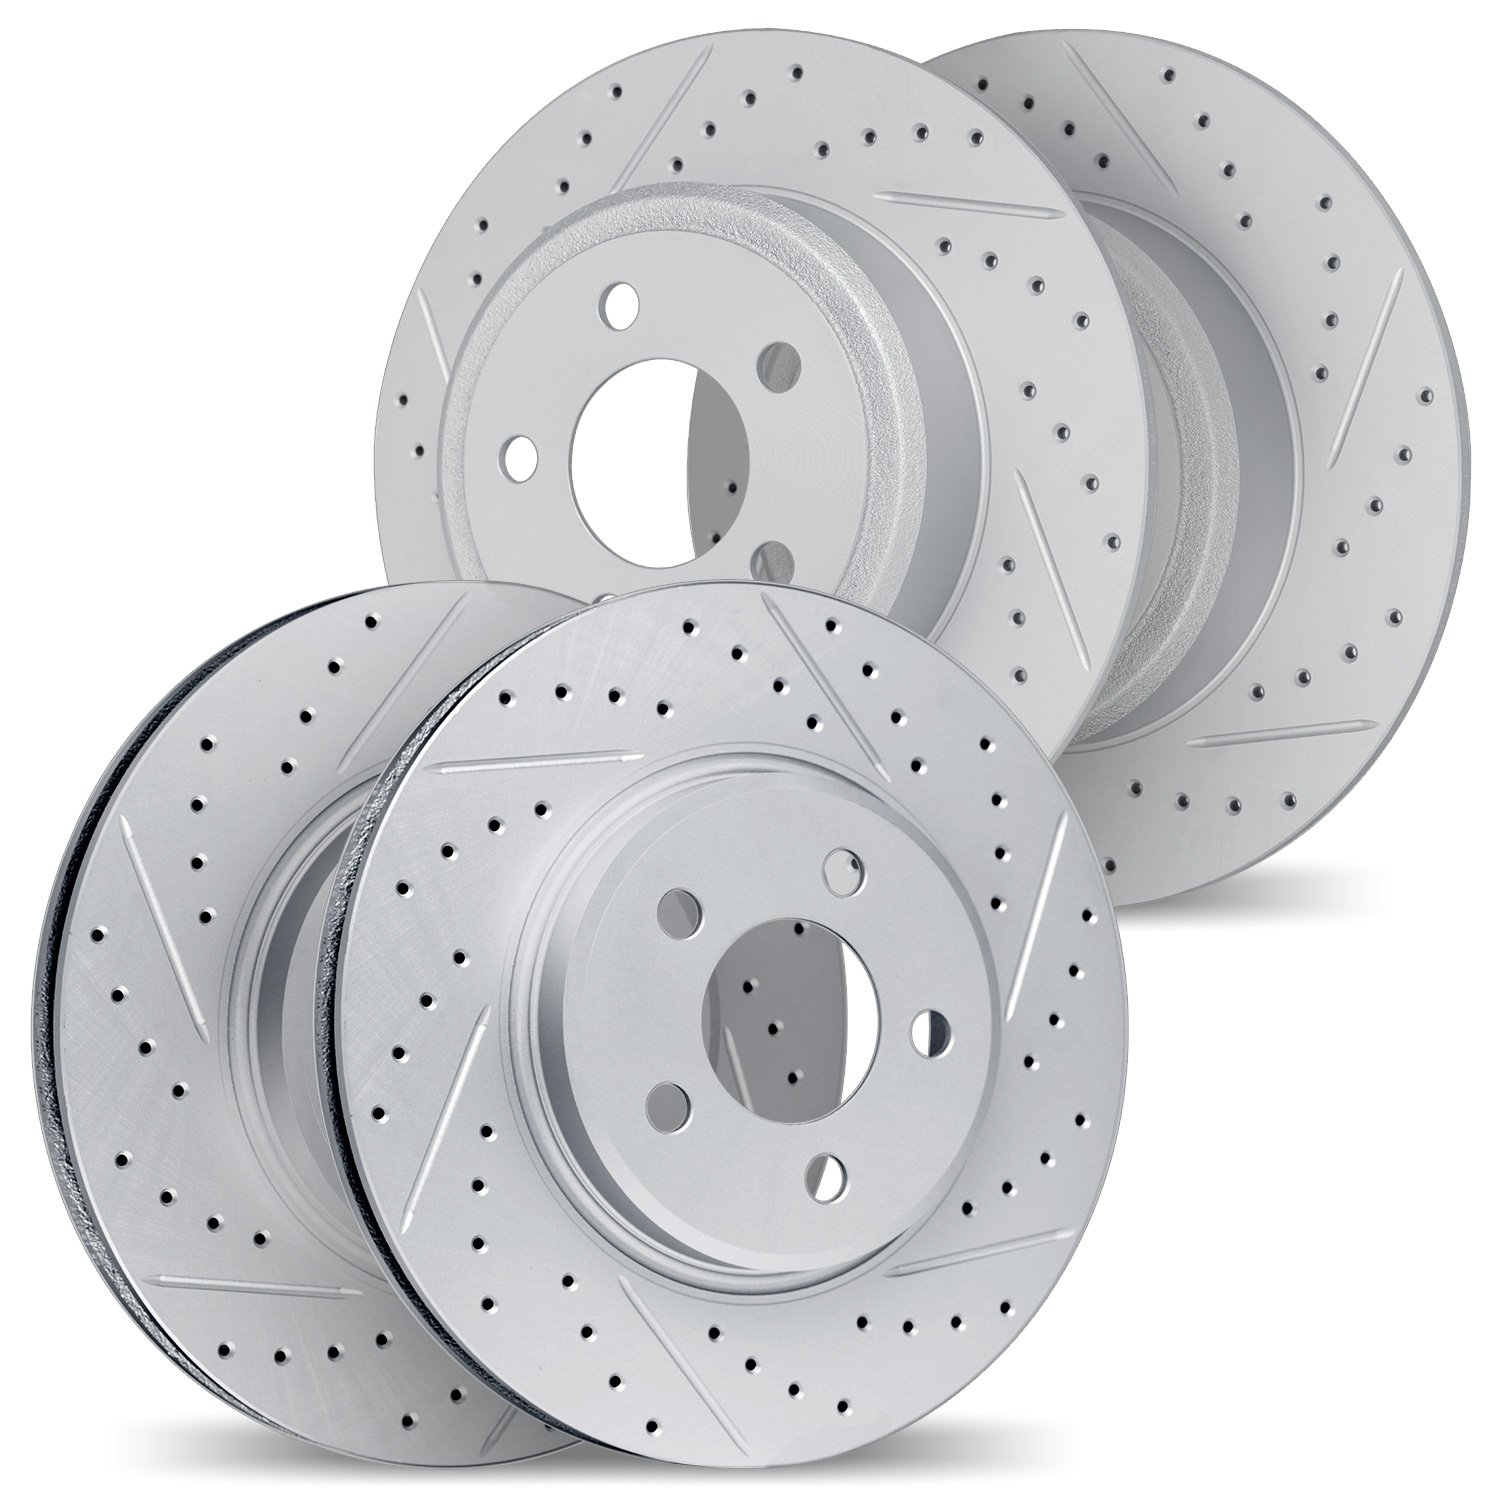 2004-63046 Geoperformance Drilled/Slotted Brake Rotors, 1998-2005 Mercedes-Benz, Position: Front and Rear